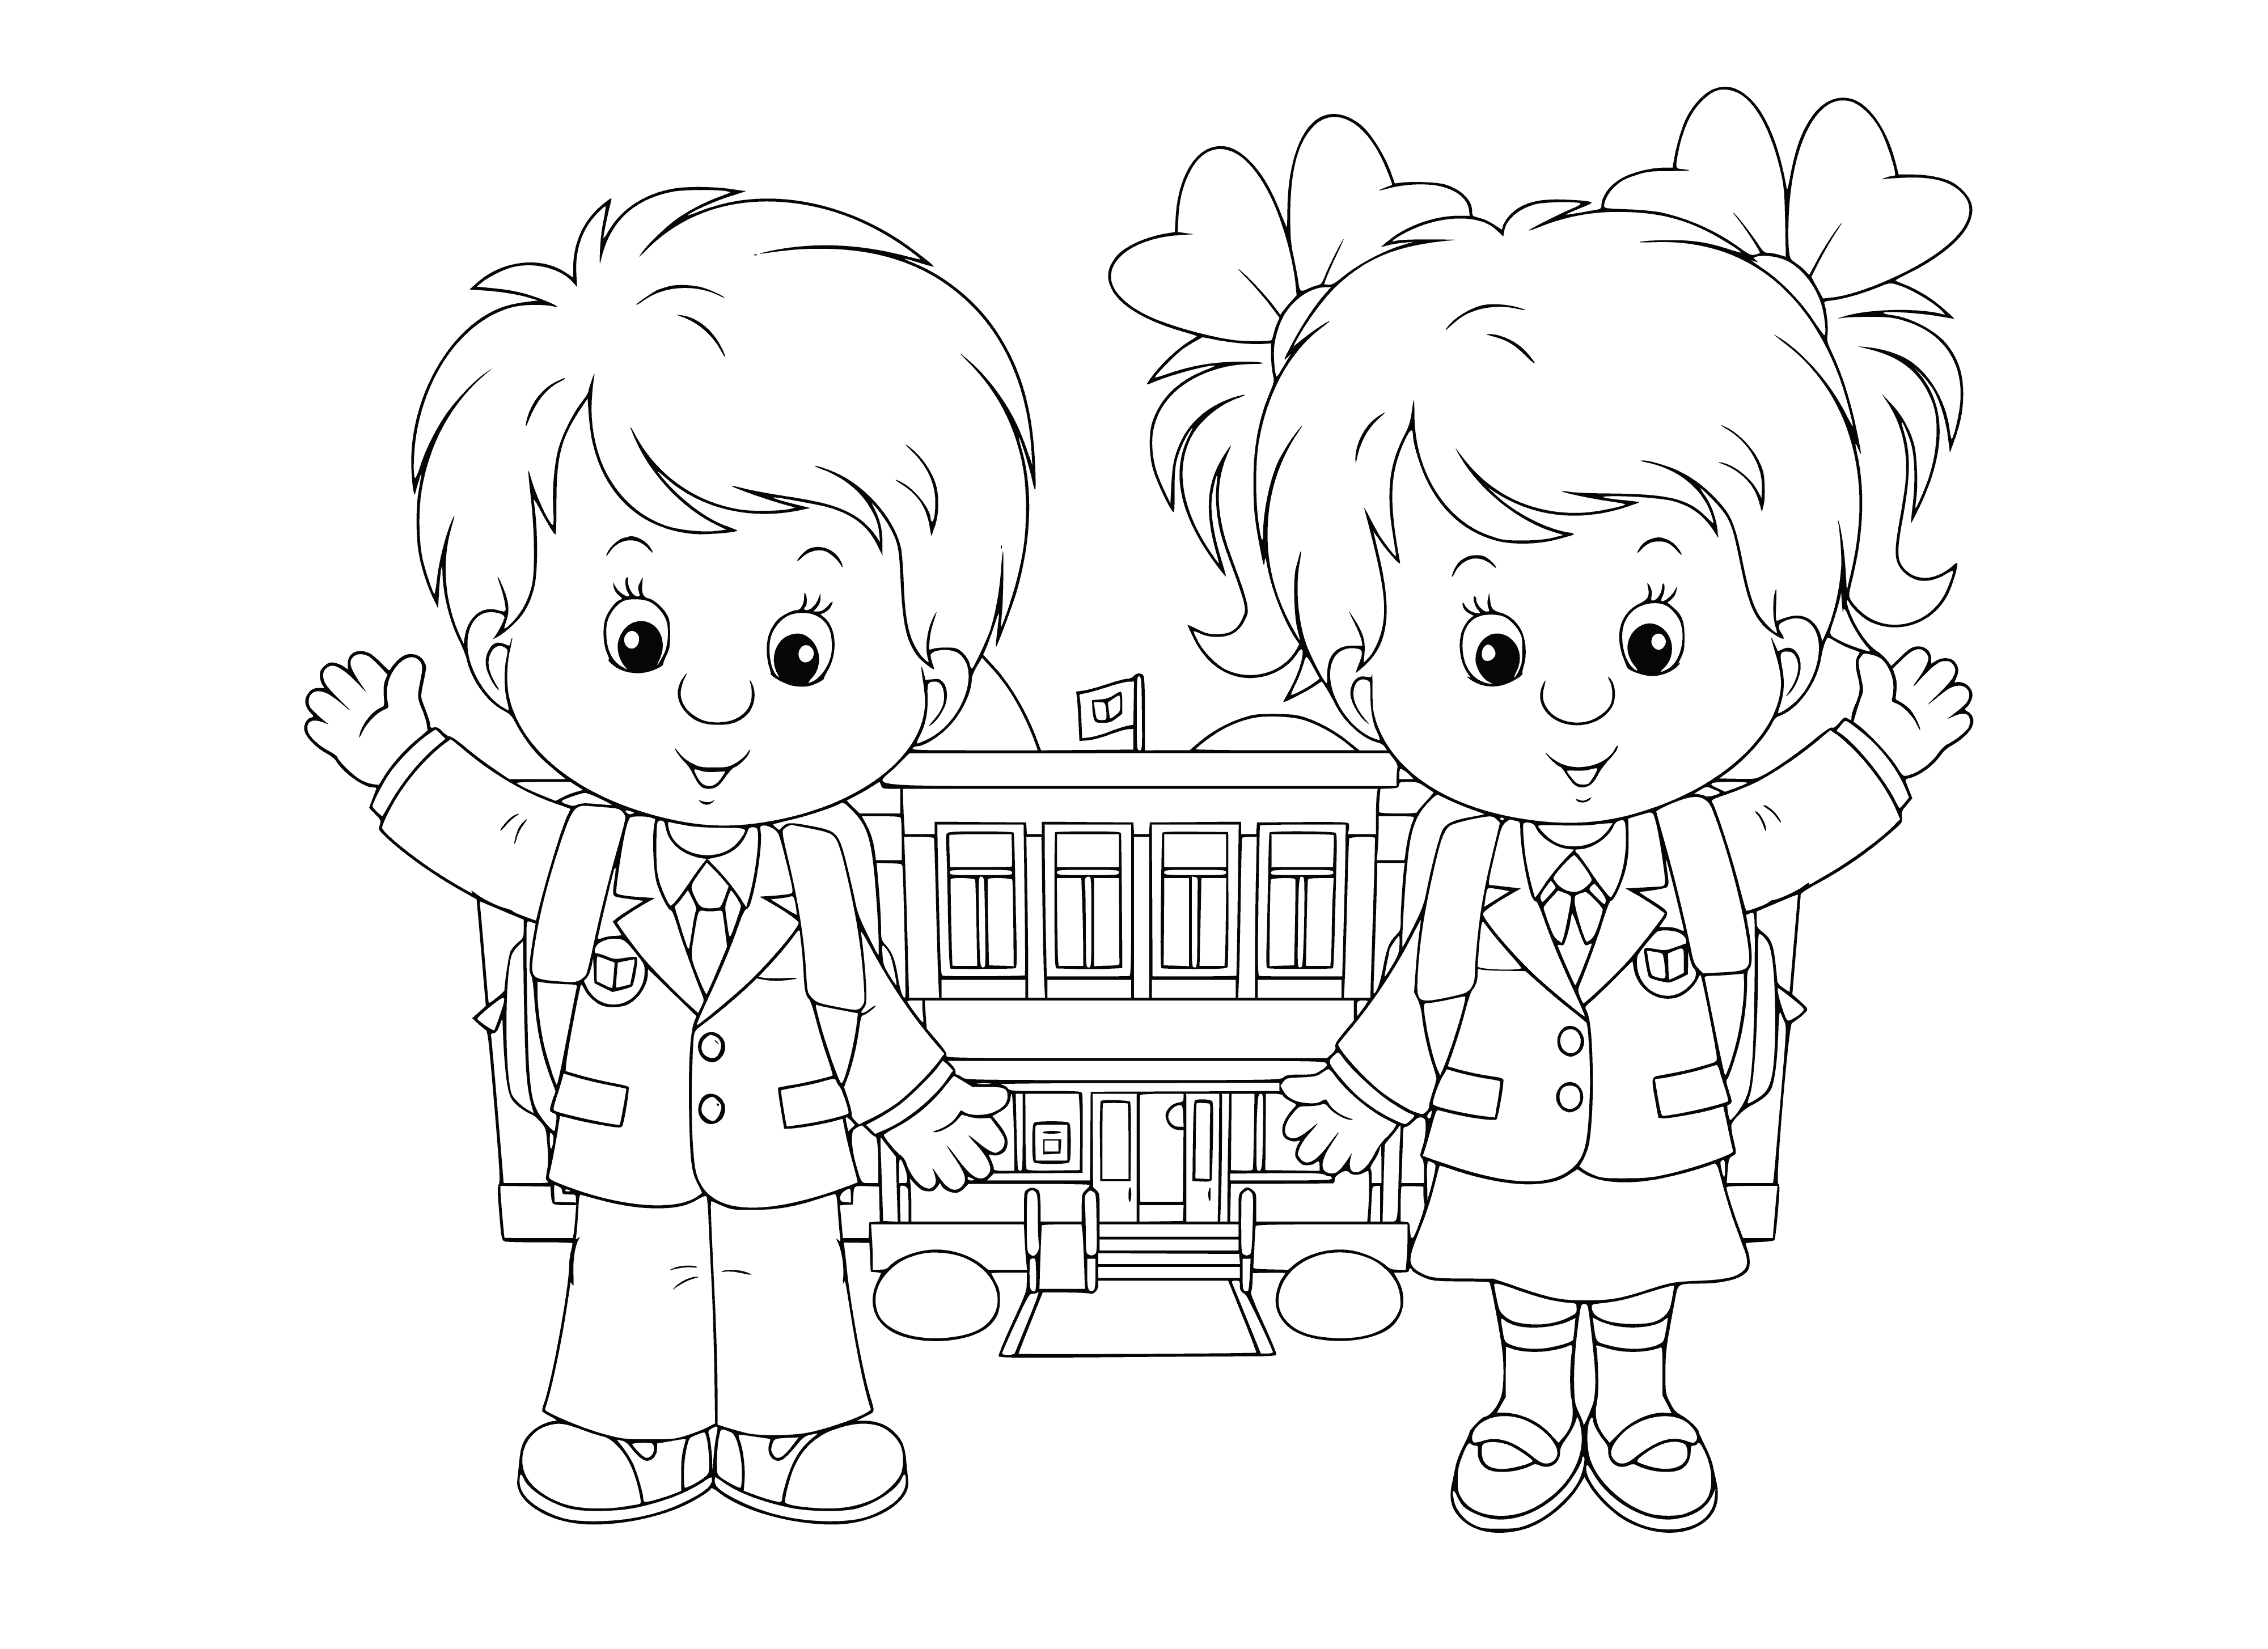 coloring page: Kids with books ready for the first day of school, celebrating knowledge and the start of a new school year. #backtoschool